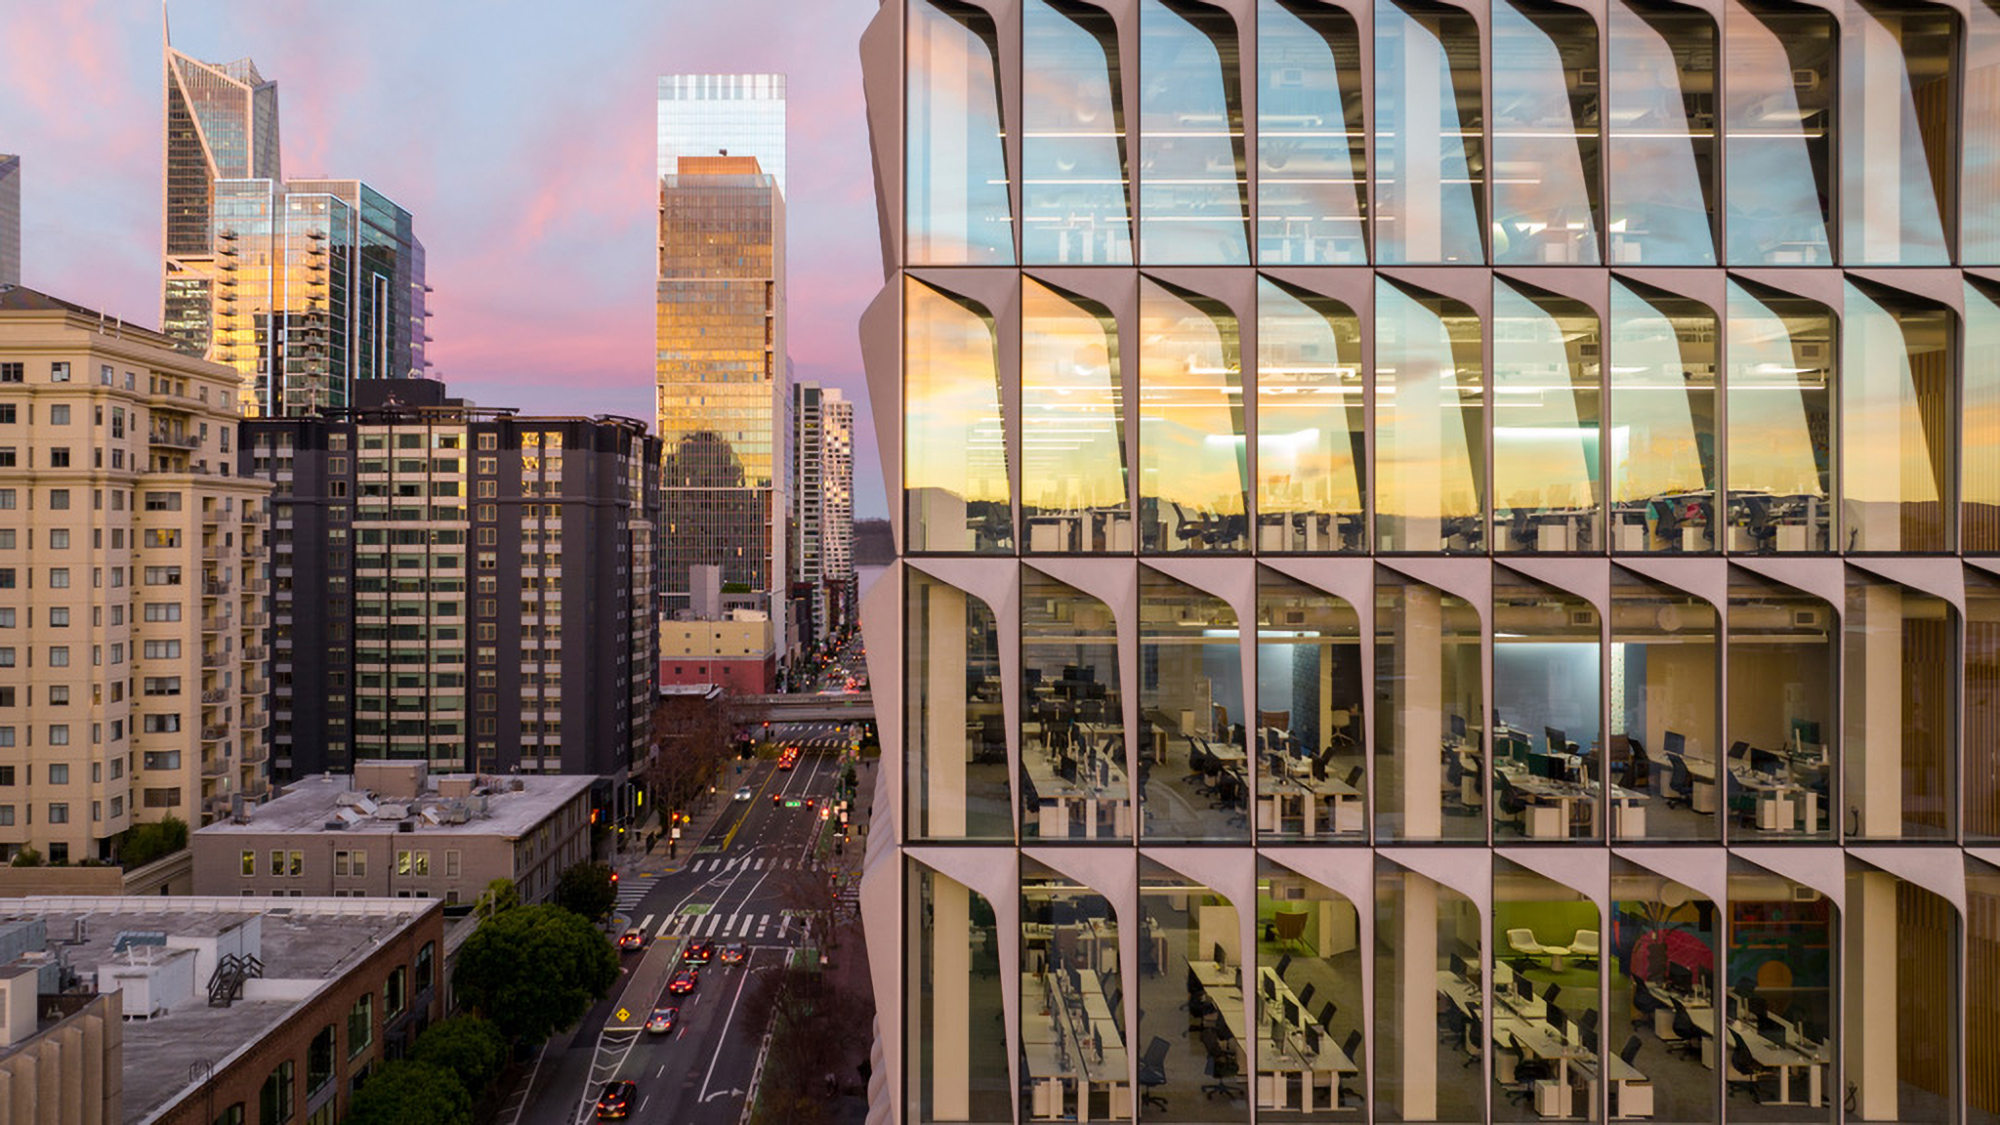 633 Folsom office building in San Francisco during sunset